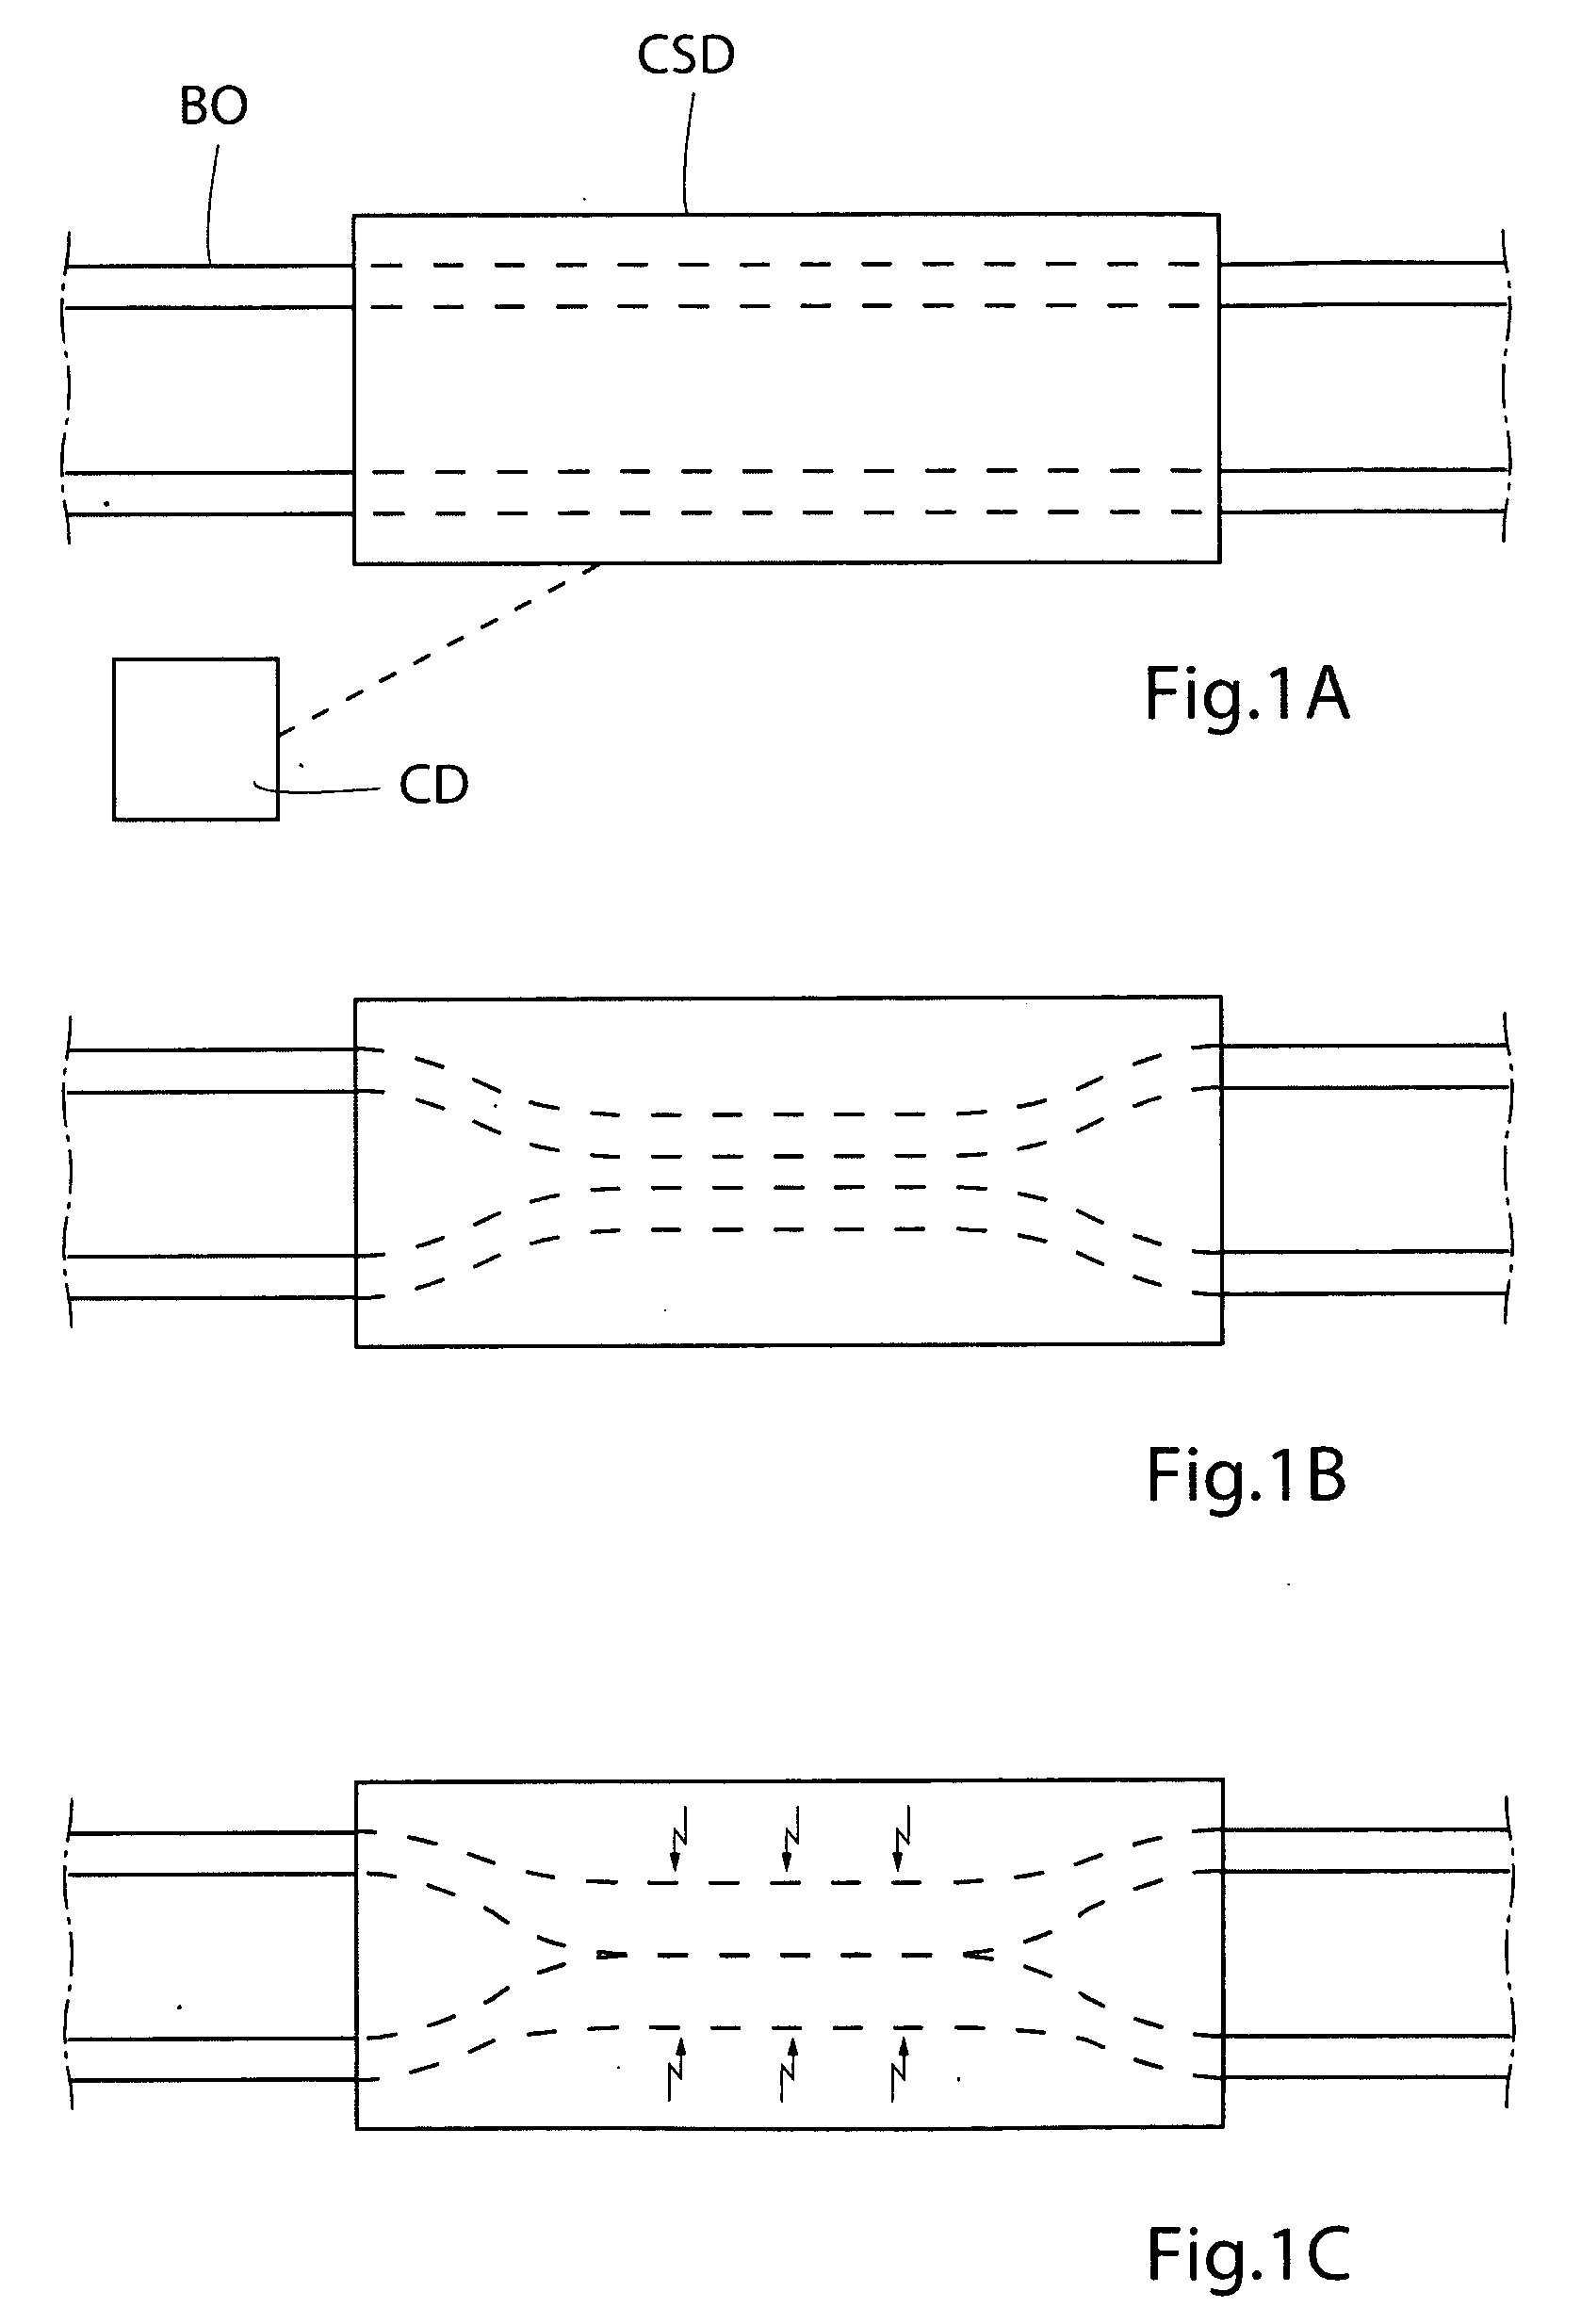 Method for controlling flow of eggs in a uterine tube